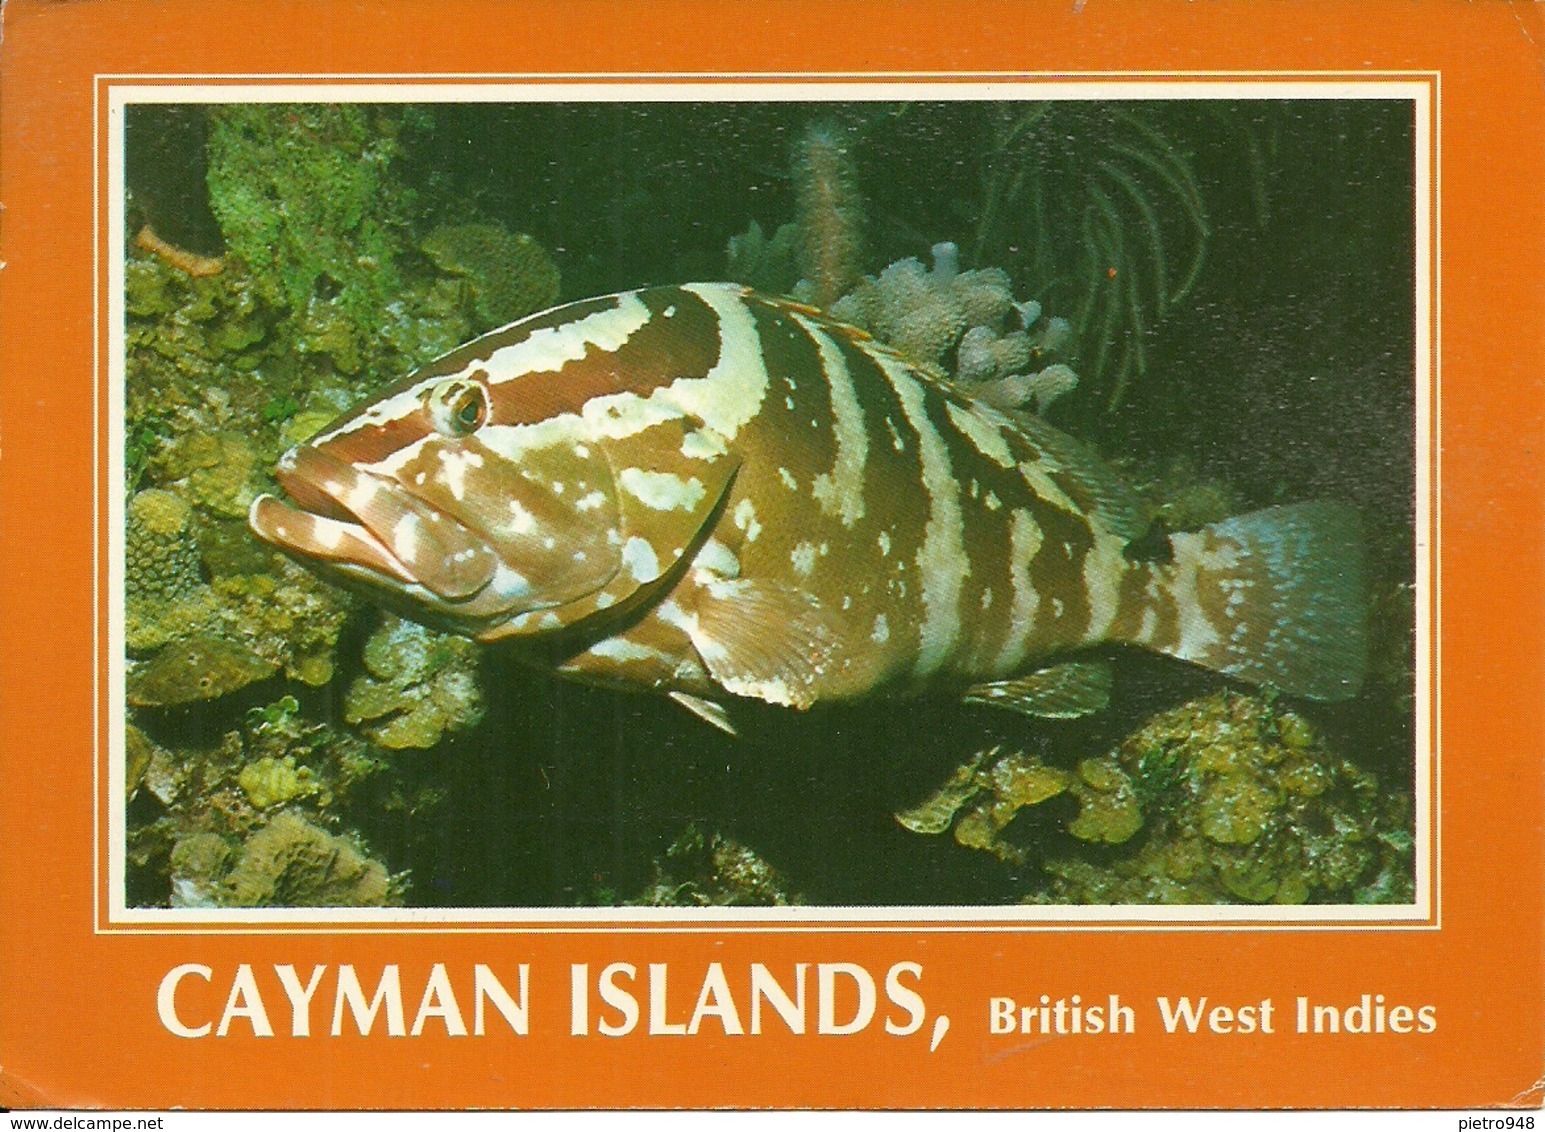 Cayman Islands (BWI, British West Indies) The Grouper Fish, Il Pesce Grouper - Cayman Islands